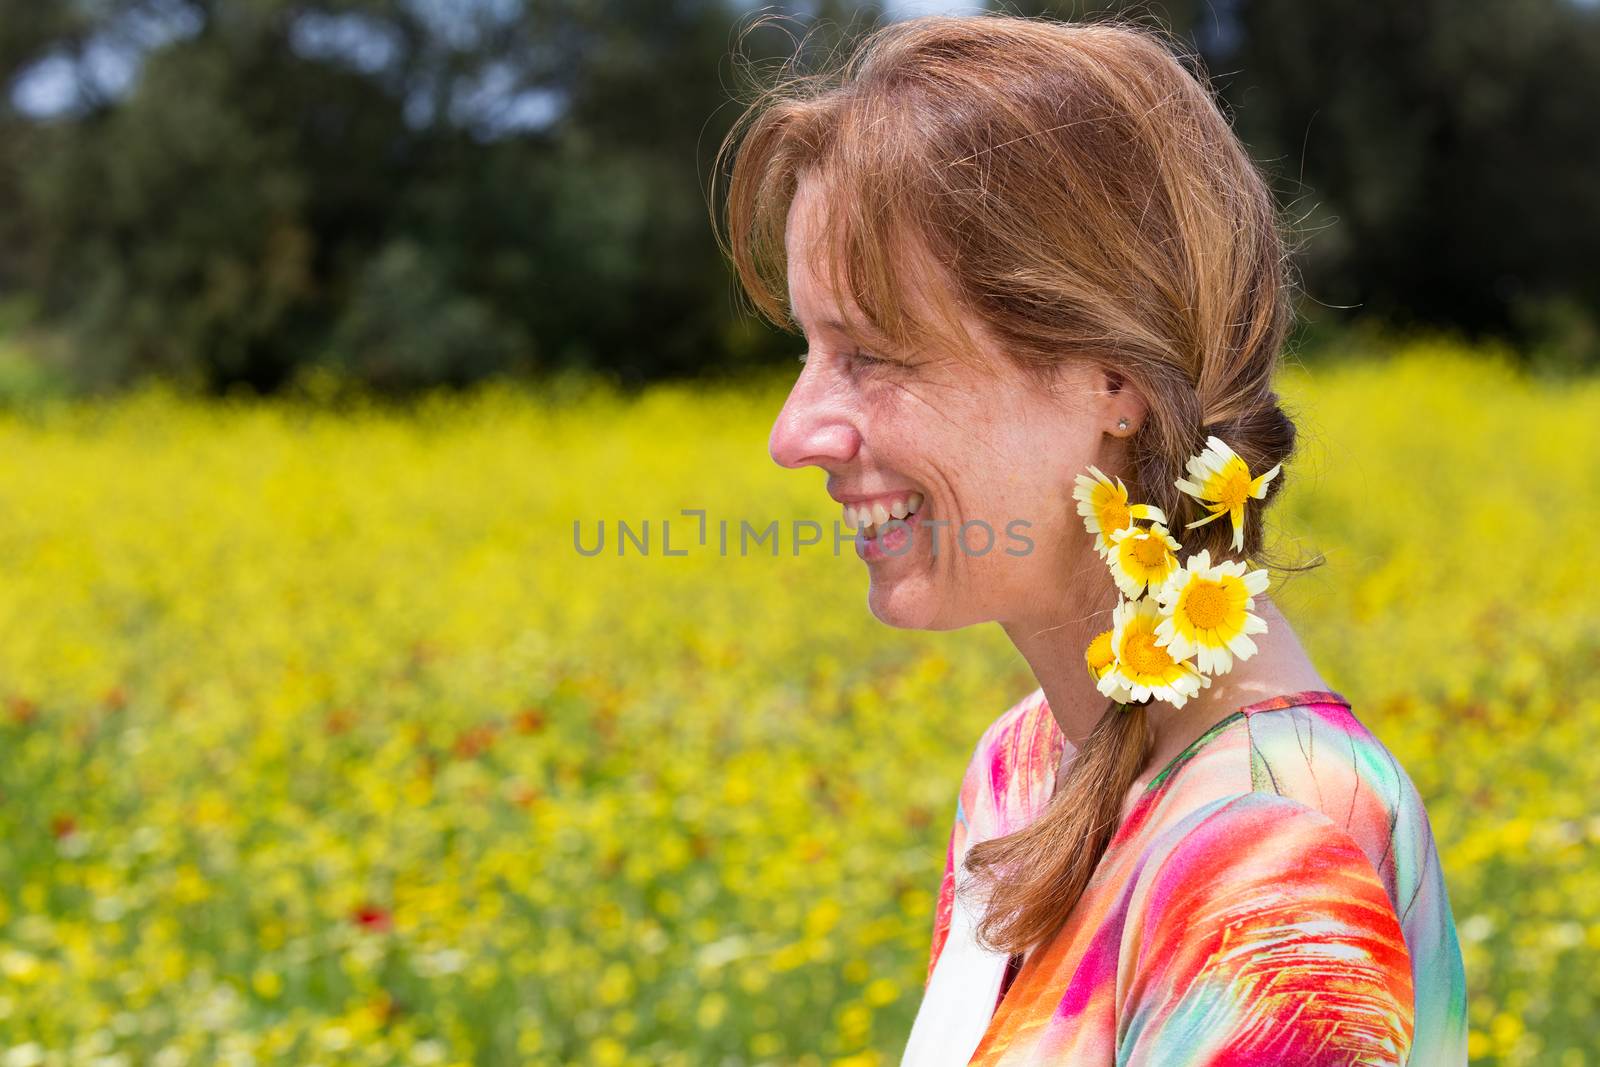 european woman wearing braid with yellow flowers near coleseed f by BenSchonewille